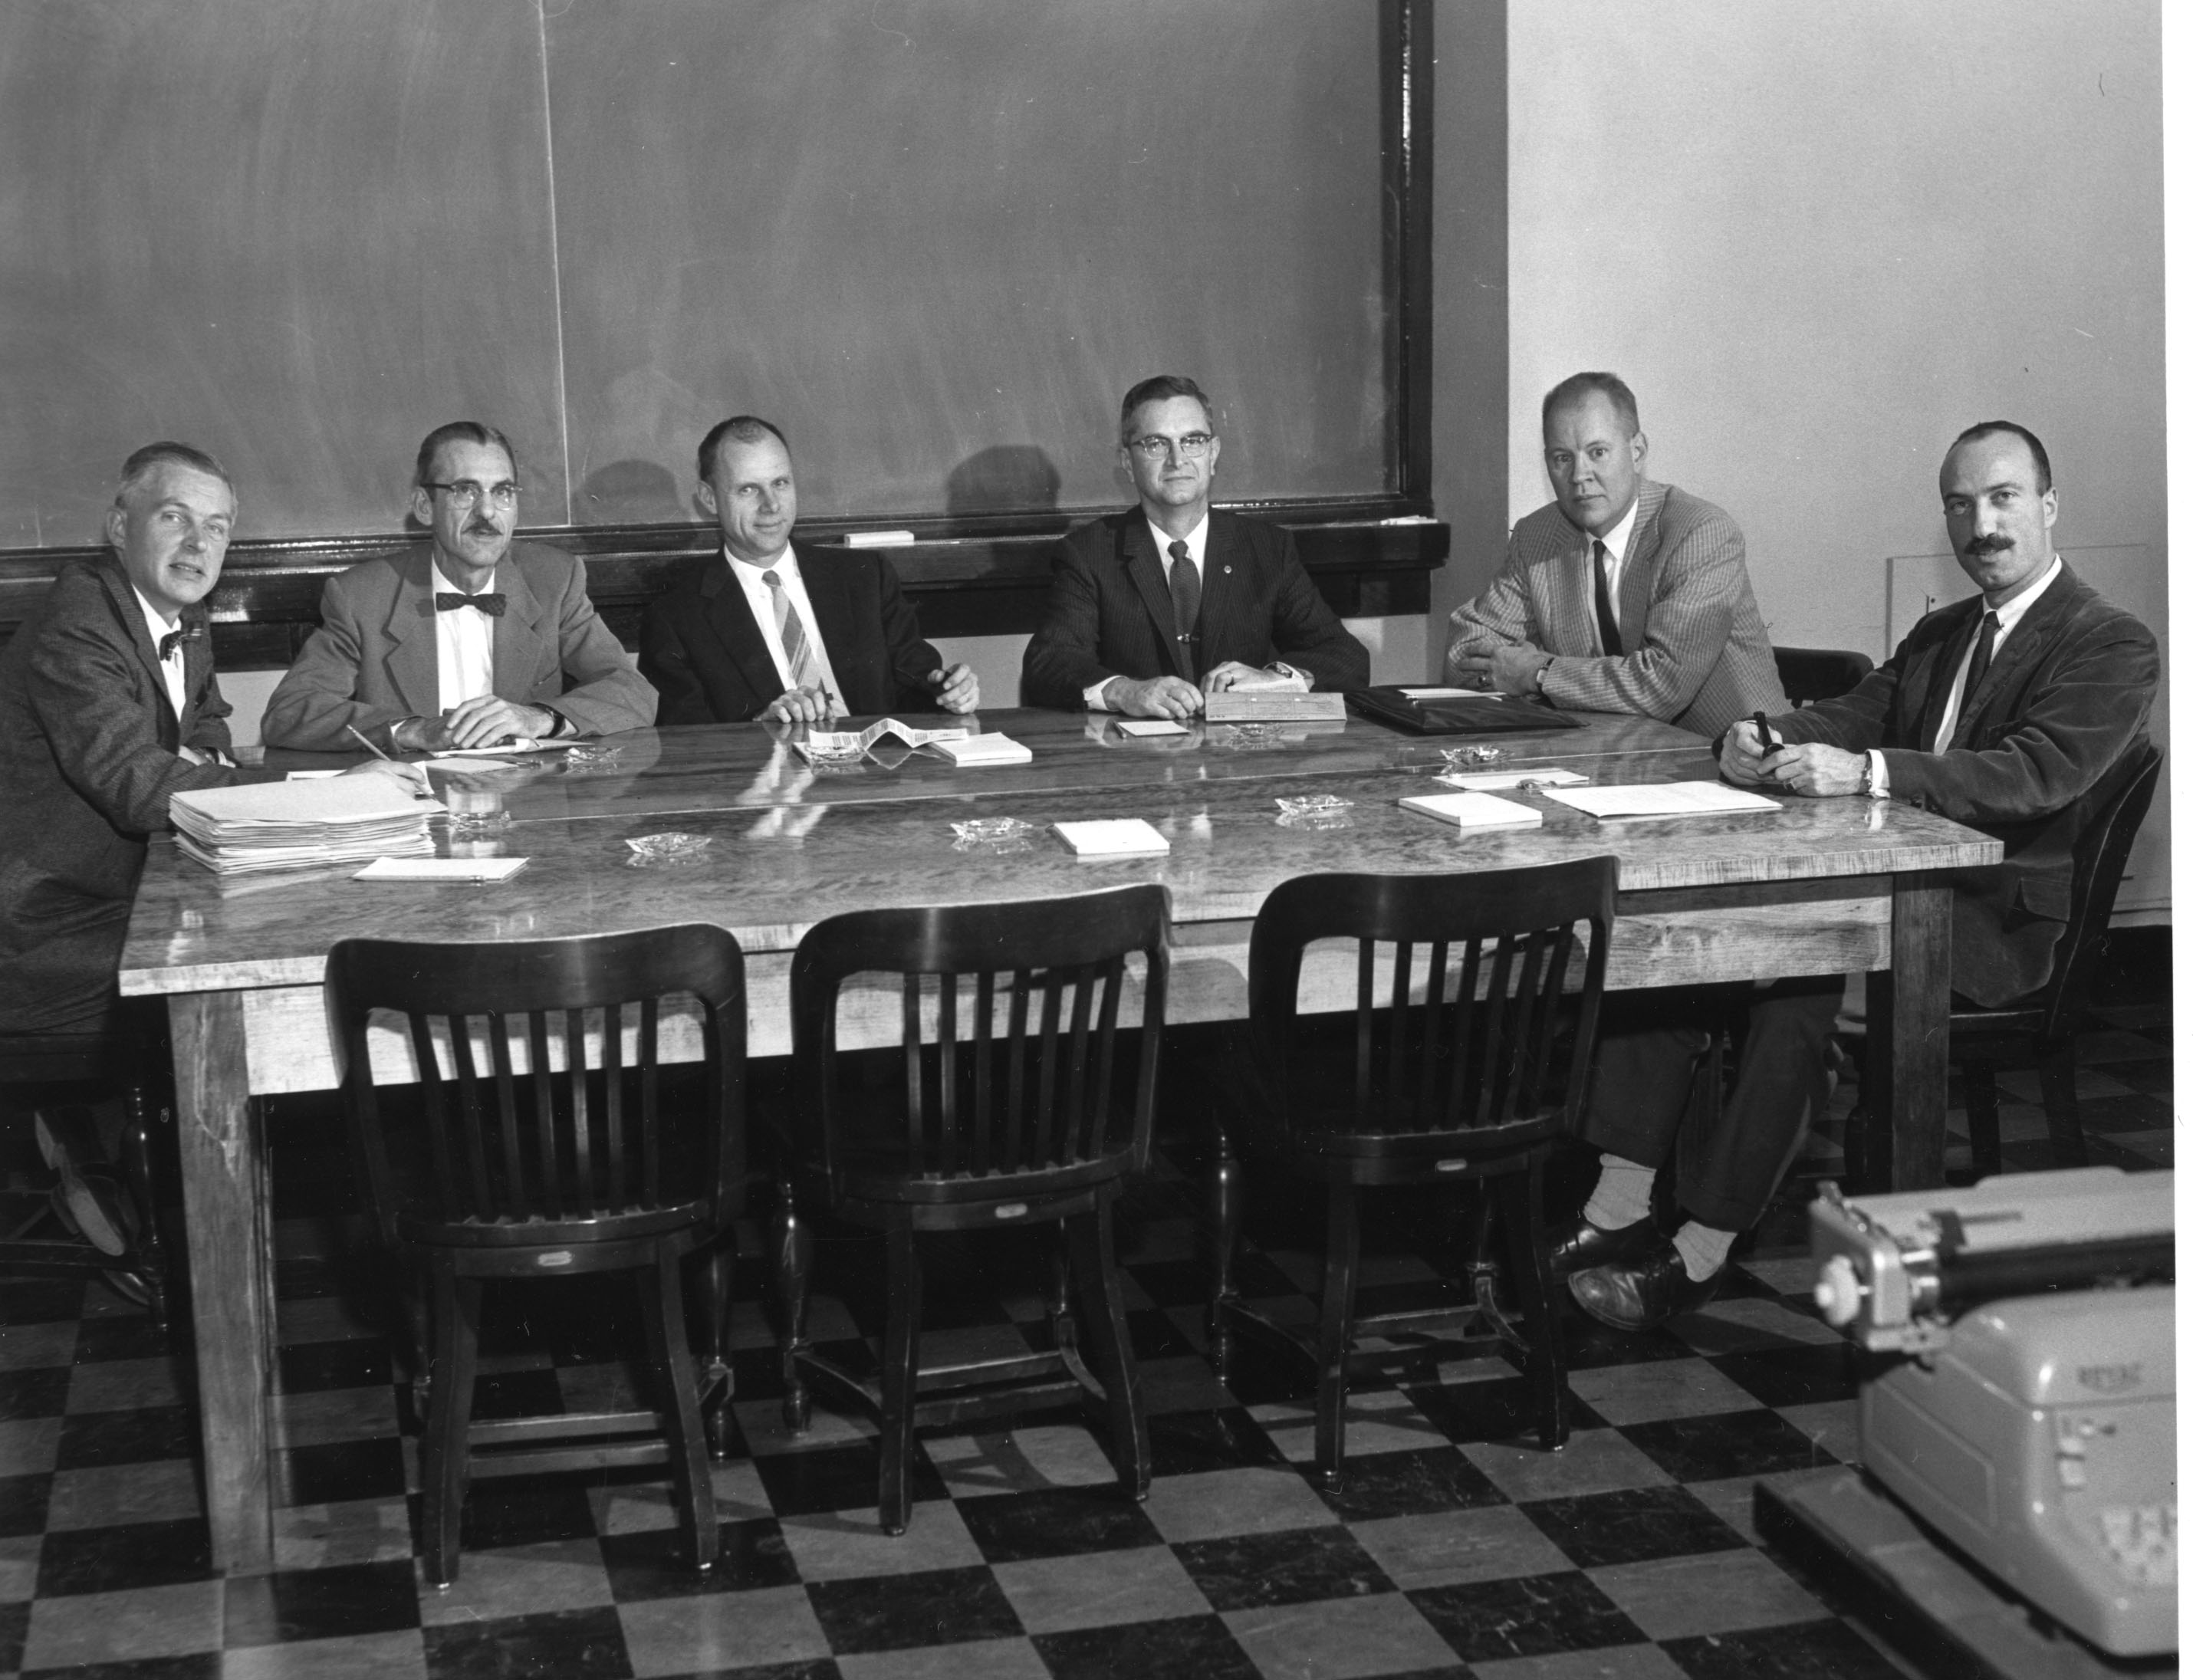 A black and white photo of a group of men in suits sitting around a table with many documents strewn about.